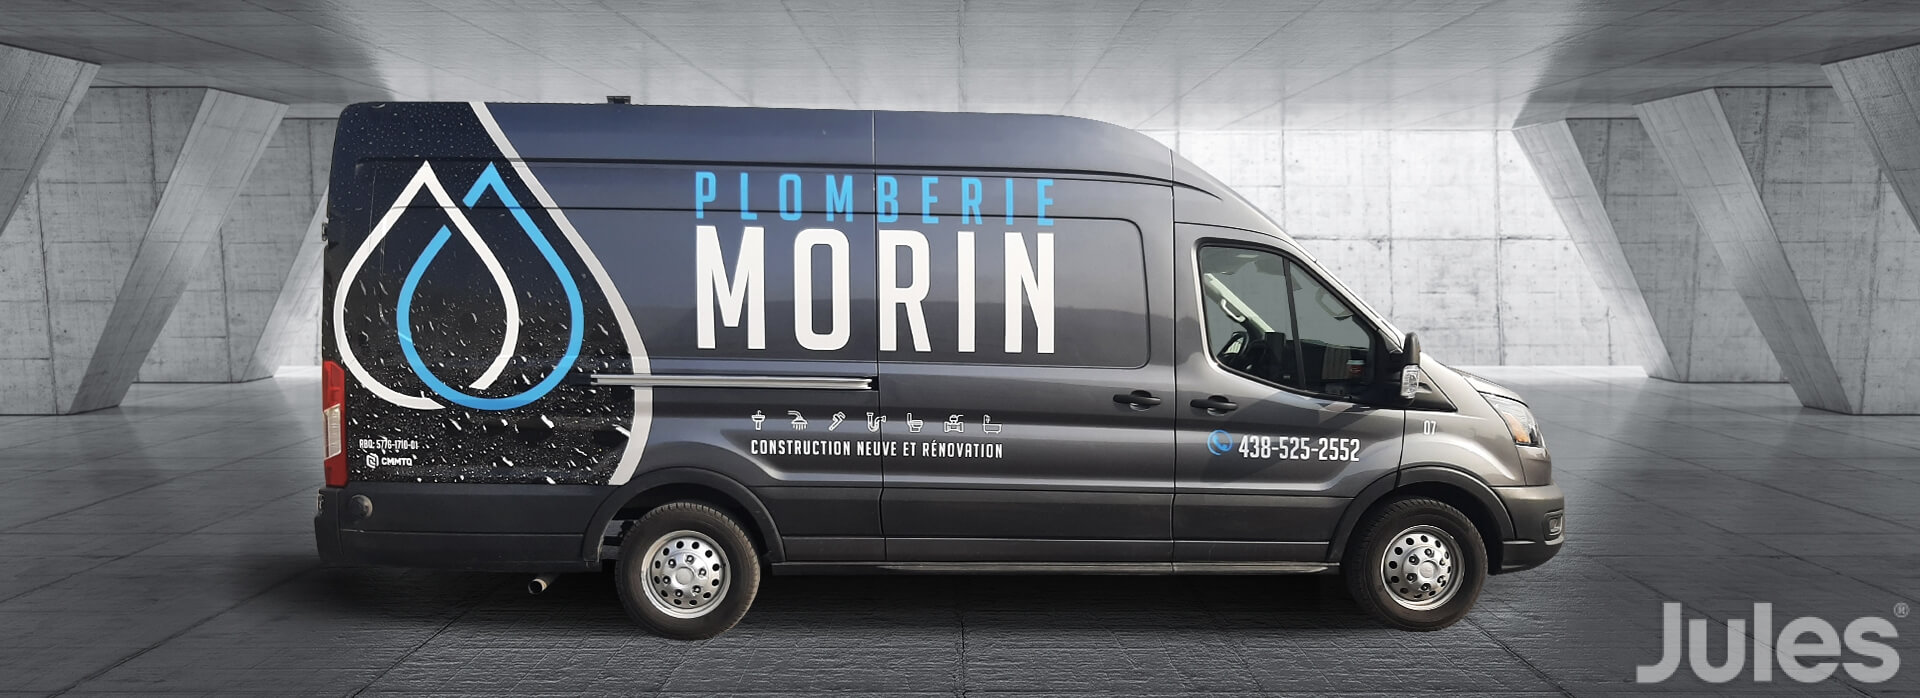 LETTRAGE FORD TRANSIT PLOMBERIE MORIN CONSTRUCTION RENOVATION PLOMBIER